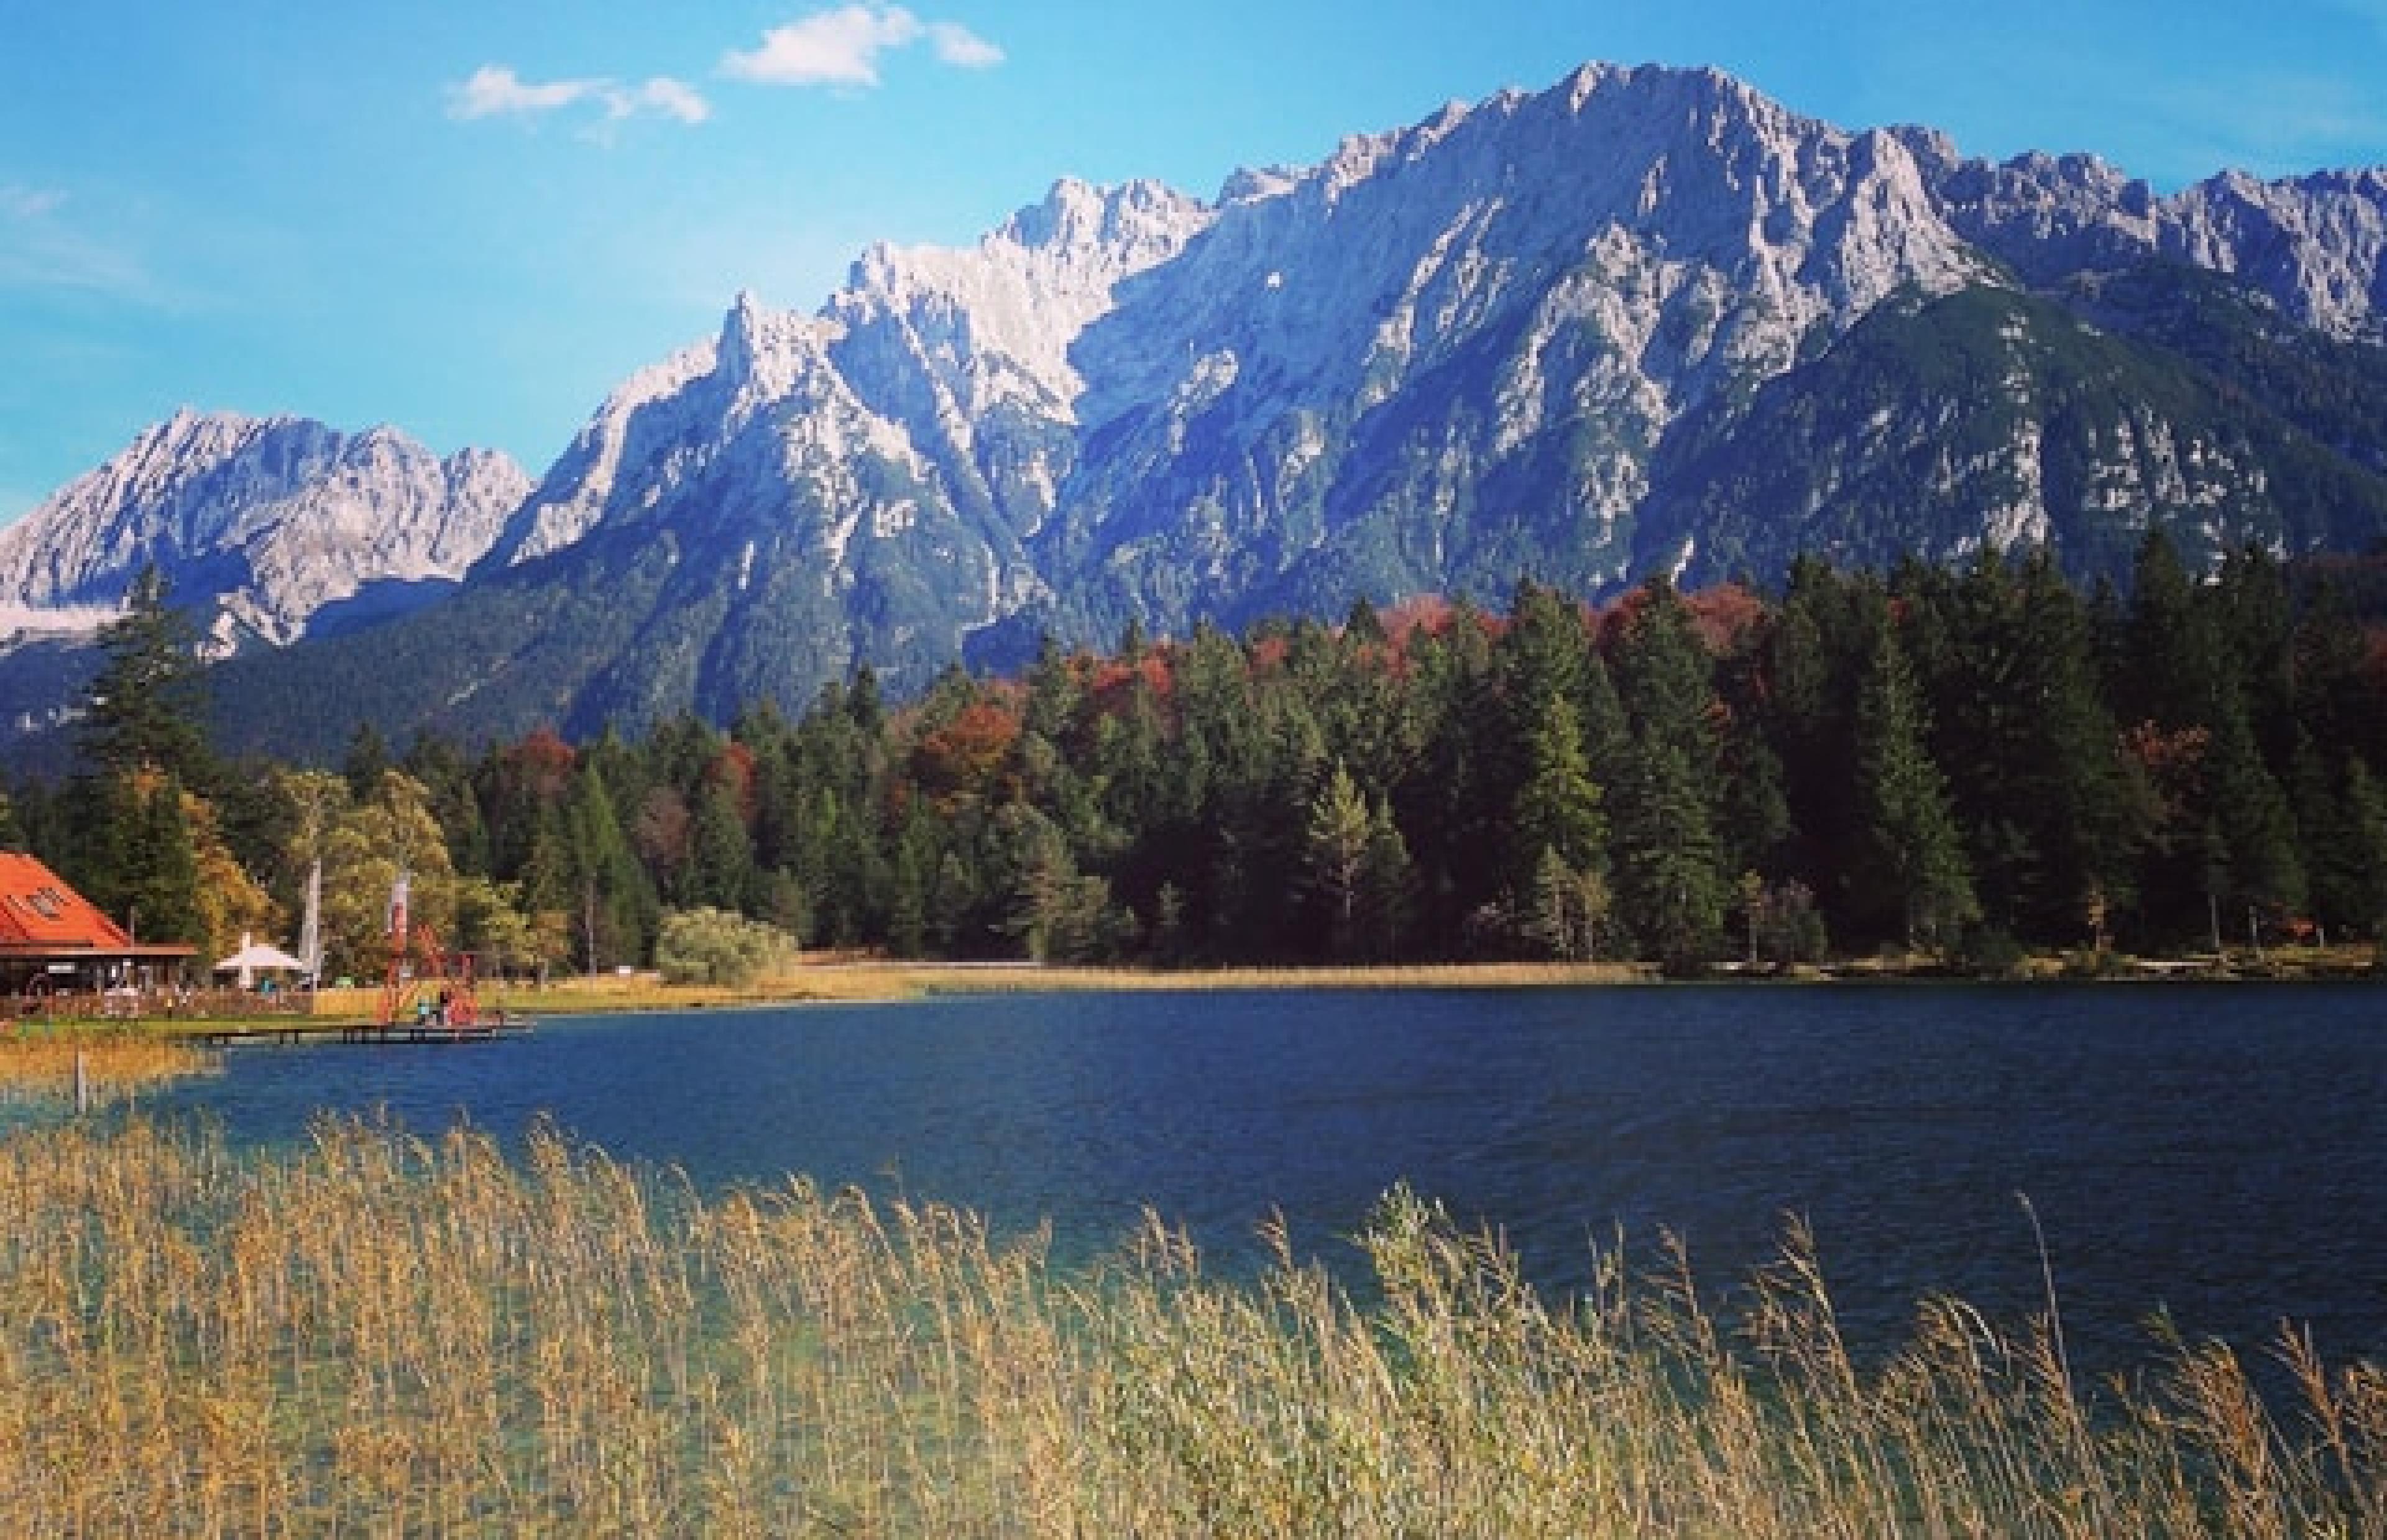 Mountain at Day Trip: Bavarian Alps , Munich, Germany